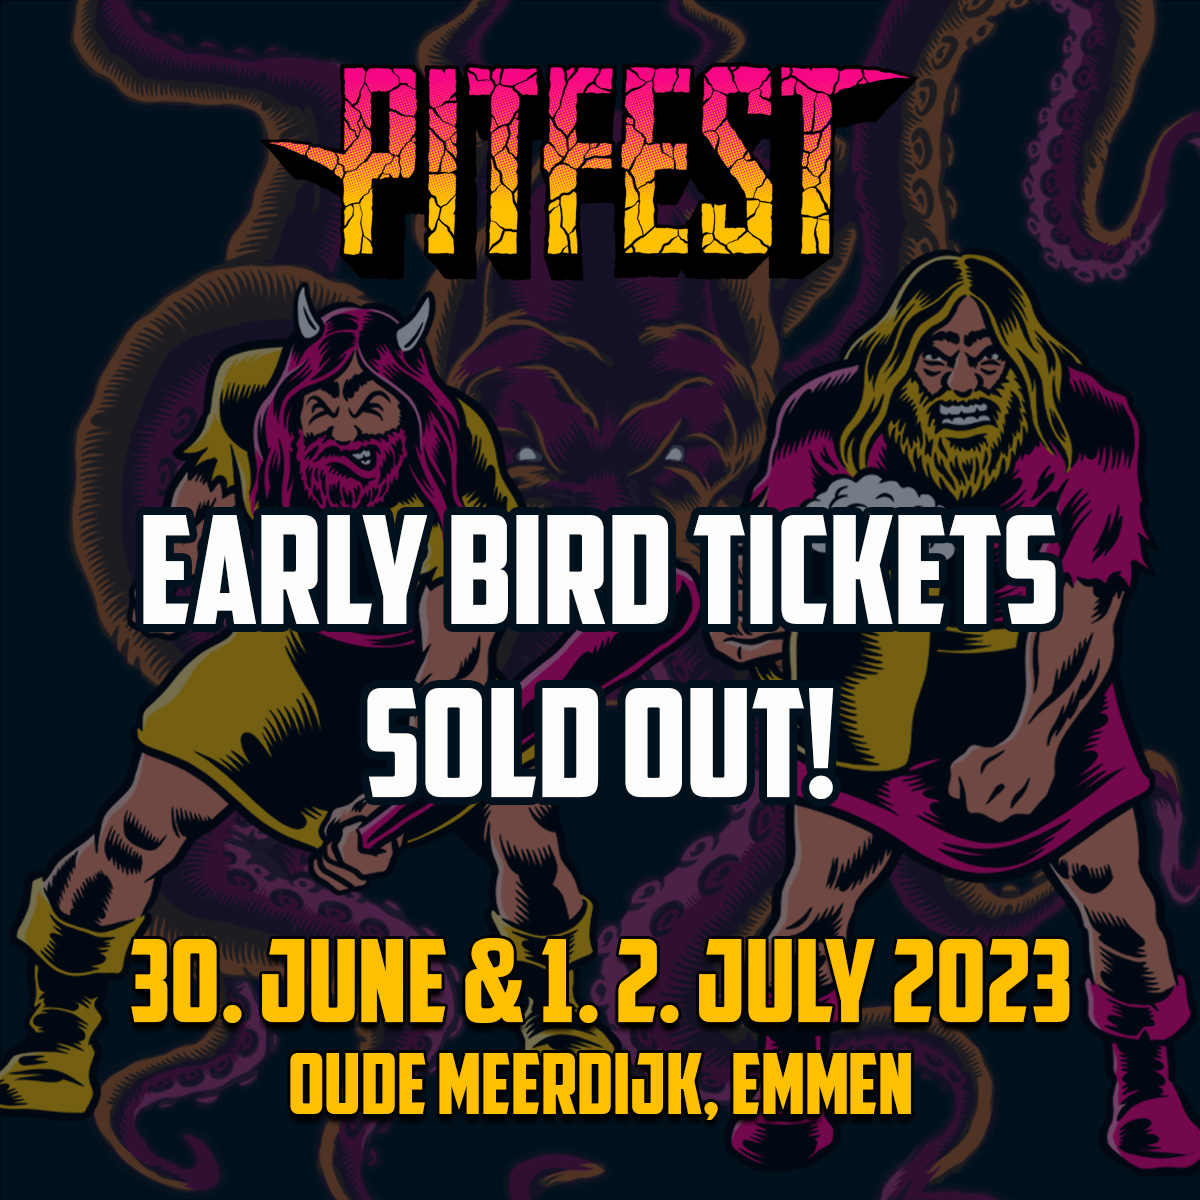 Early Bird tickets sold out!